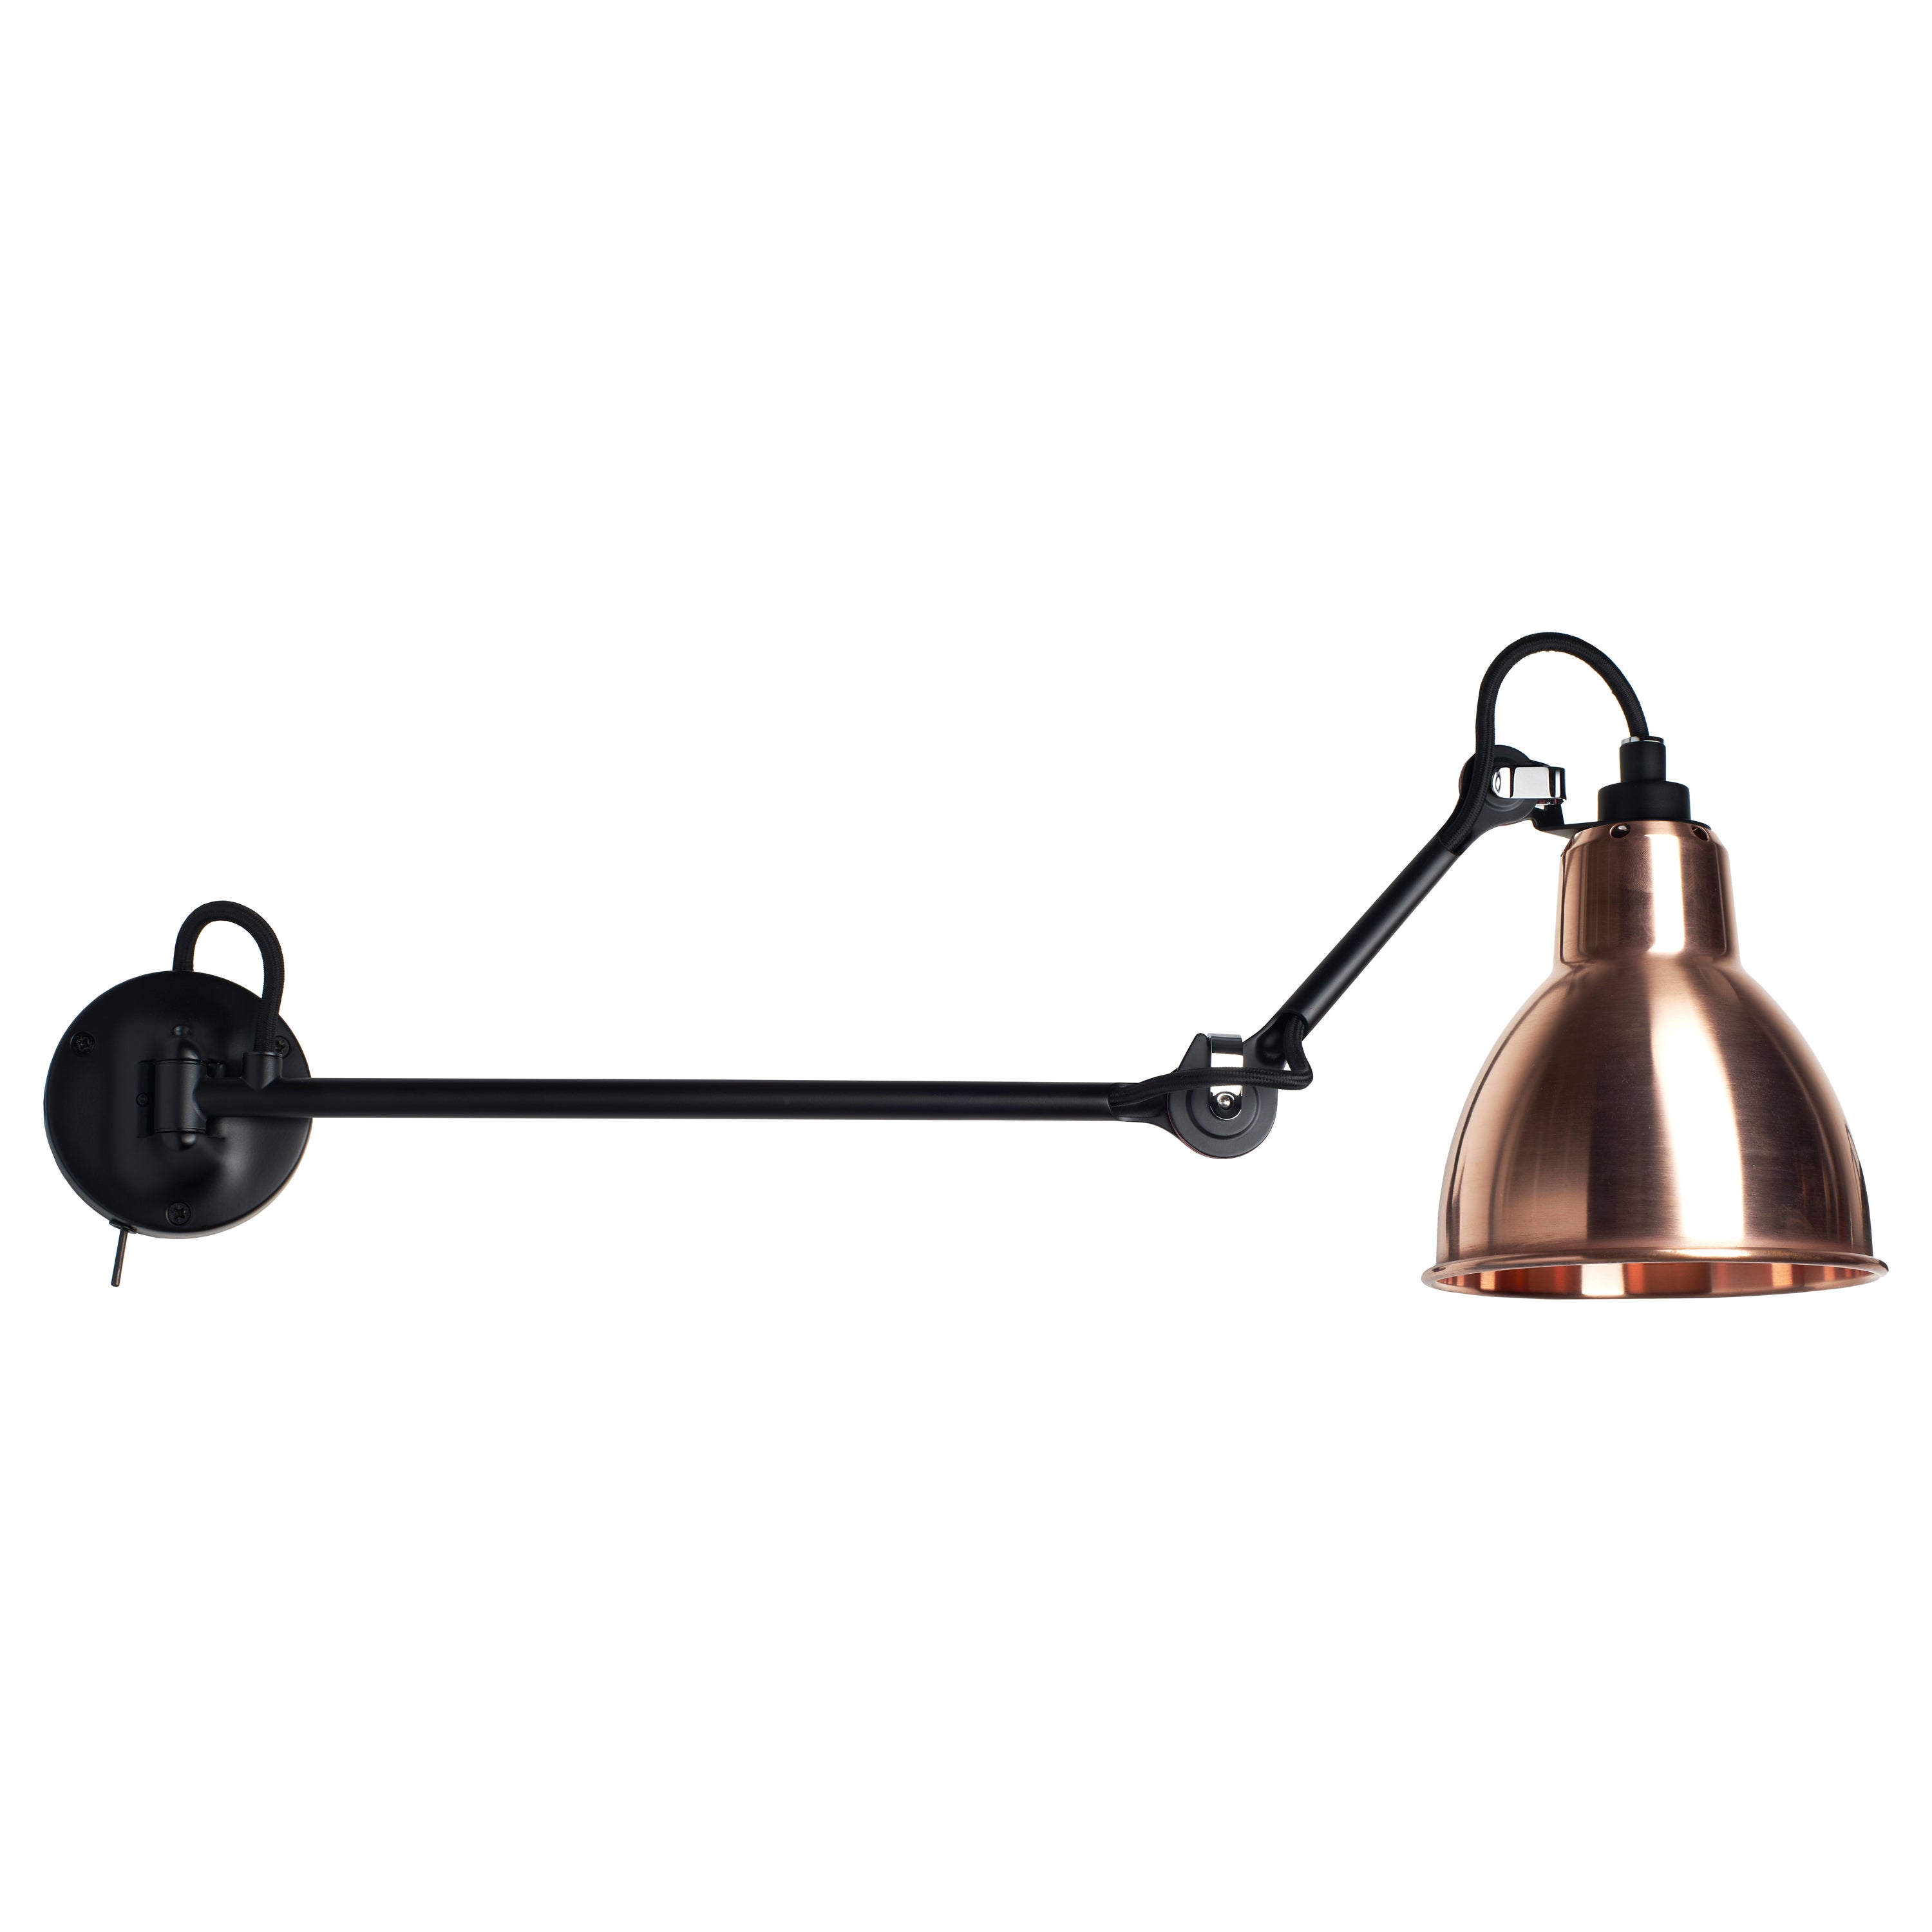 DCW Editions La Lampe Gras N°204 L40 SW Wall Lamp in Black Arm &Raw Copper Shade For Sale